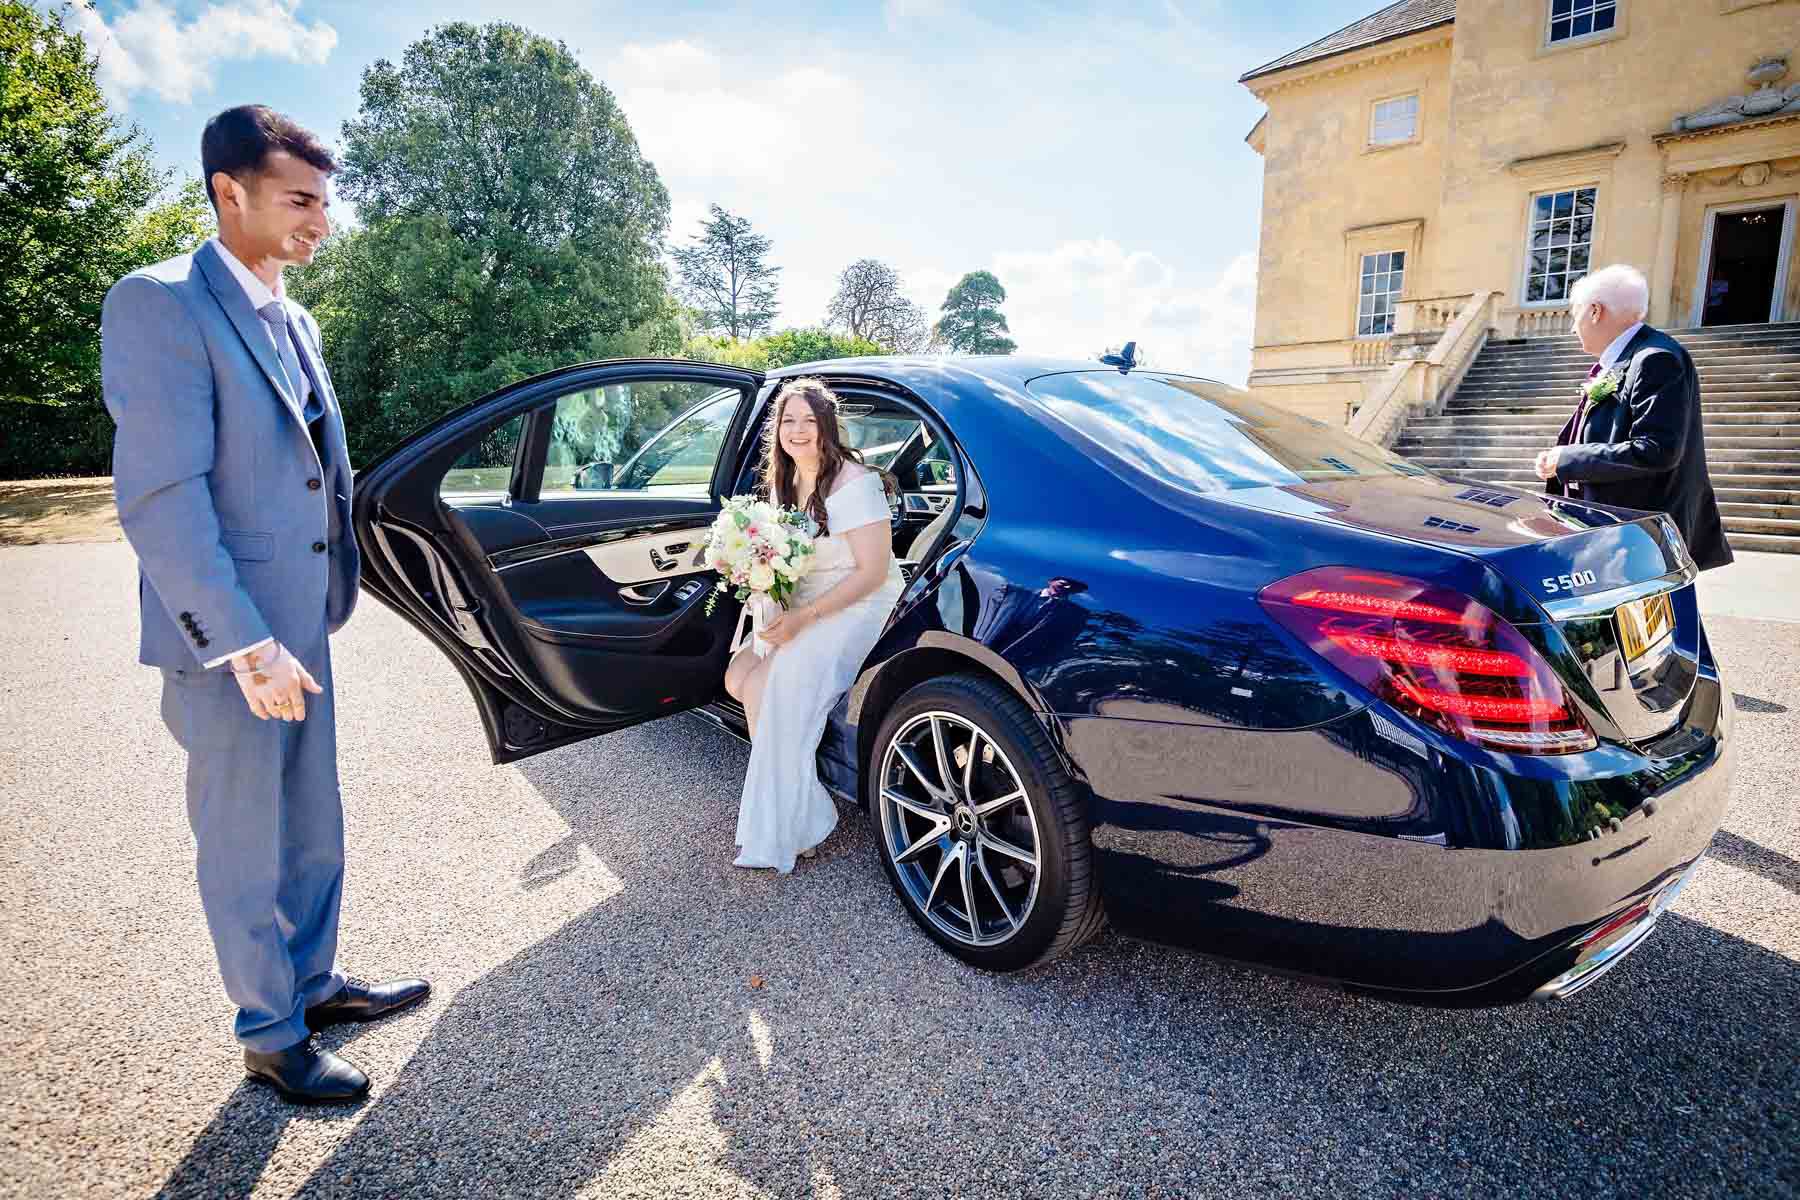 The bride arrives on the drive outside Danson House. Official cars may wait outside for members of the bridal party but not other guests.